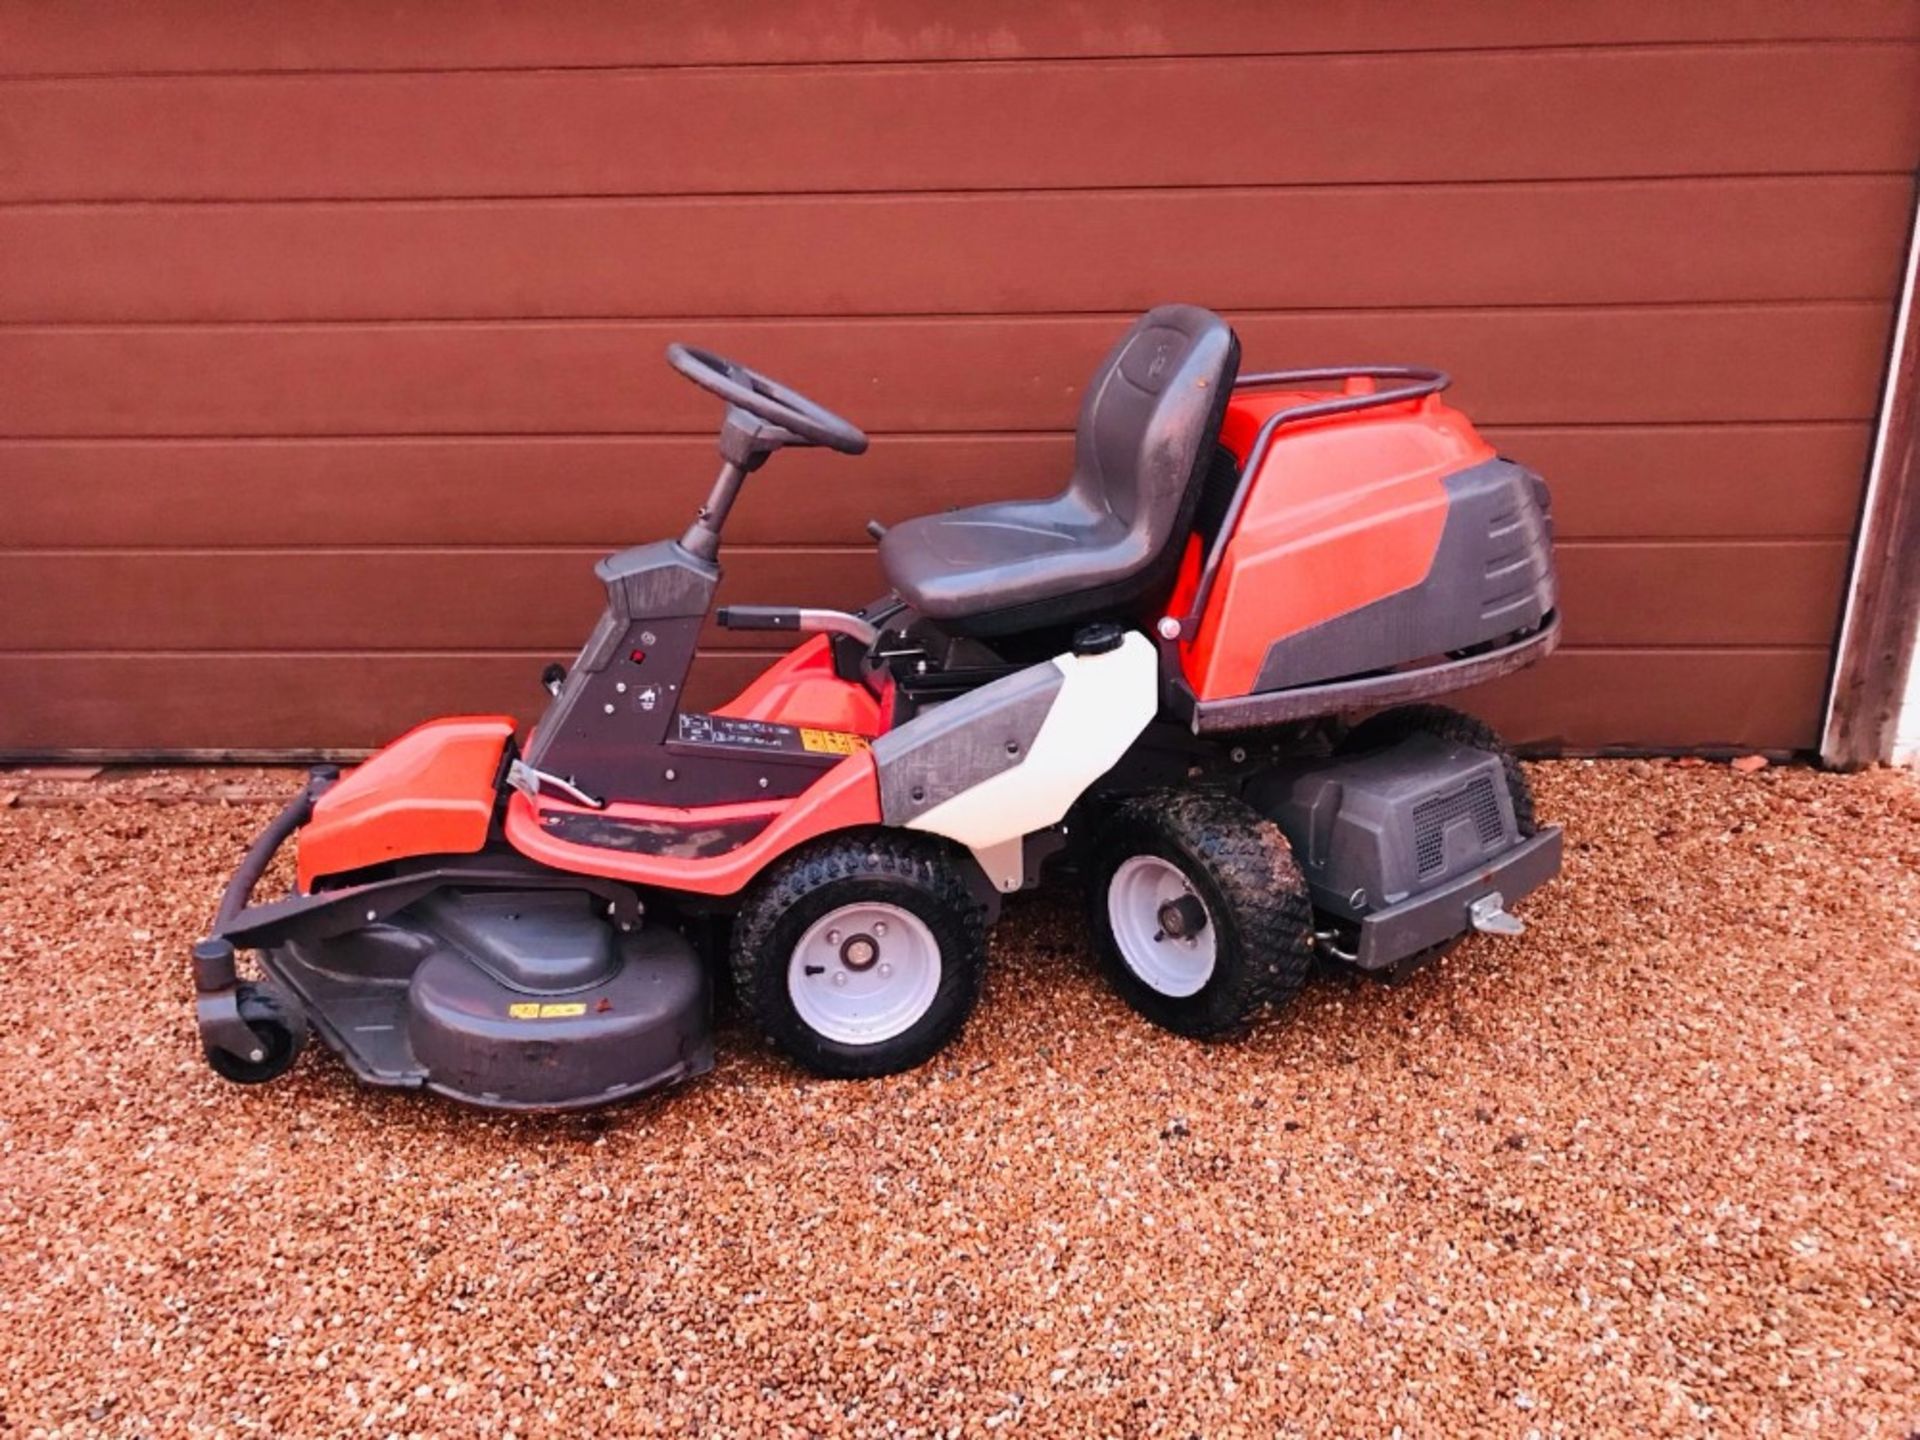 HUSQVARNA PR17 4WD RIDE ON MOWER WITH OUTFRONT MULCH DECK 112CM WIDTH. 270 REC HOURS, YEAR 2011.